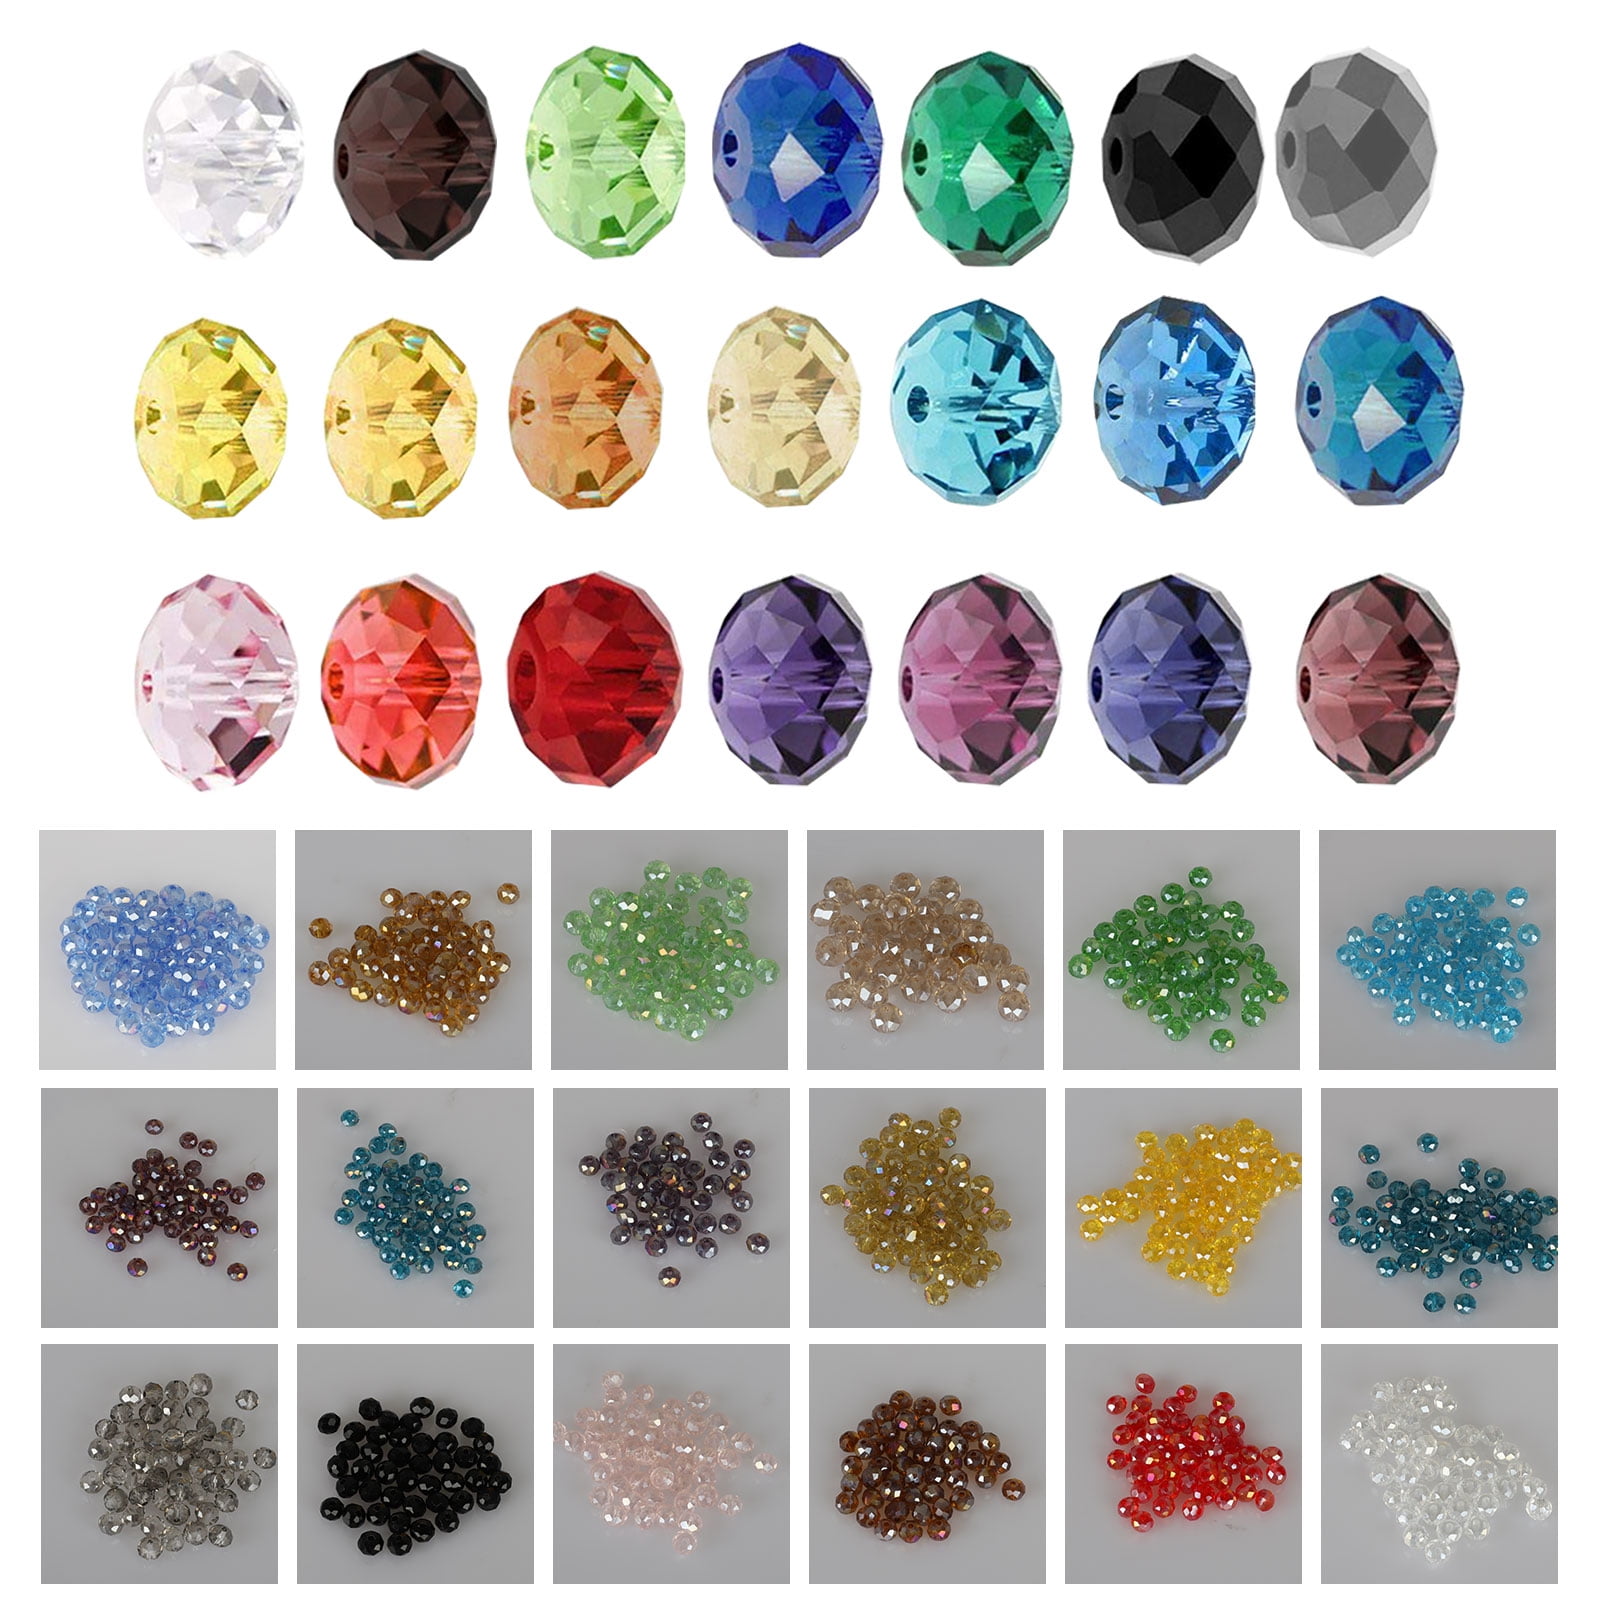 50 Random Glass European Beads Faceted Rondelle No Metal Large Hole Charms 13mm 